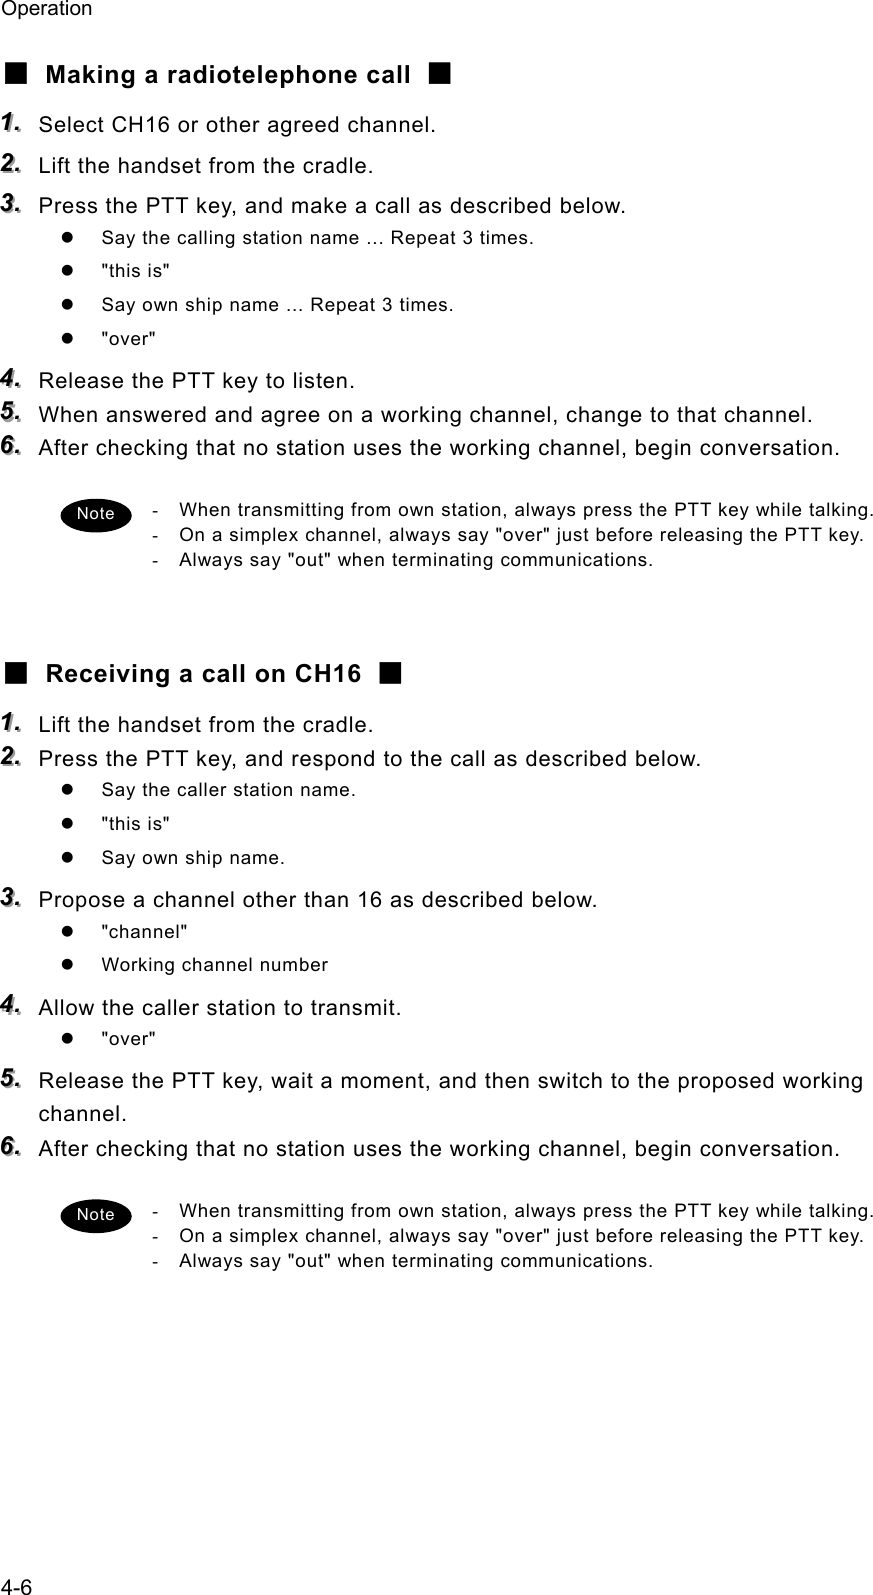 Operation 4-6 ■  Making a radiotelephone call  ■ 111...   Select CH16 or other agreed channel. 222...   Lift the handset from the cradle. 333...   Press the PTT key, and make a call as described below. z  Say the calling station name ... Repeat 3 times. z &quot;this is&quot; z  Say own ship name ... Repeat 3 times. z &quot;over&quot; 444...   Release the PTT key to listen. 555...   When answered and agree on a working channel, change to that channel. 666...   After checking that no station uses the working channel, begin conversation.  -  When transmitting from own station, always press the PTT key while talking. -  On a simplex channel, always say &quot;over&quot; just before releasing the PTT key. -  Always say &quot;out&quot; when terminating communications.   ■  Receiving a call on CH16  ■ 111...   Lift the handset from the cradle. 222...   Press the PTT key, and respond to the call as described below. z  Say the caller station name. z &quot;this is&quot; z  Say own ship name. 333...   Propose a channel other than 16 as described below. z &quot;channel&quot; z  Working channel number 444...   Allow the caller station to transmit. z &quot;over&quot; 555...   Release the PTT key, wait a moment, and then switch to the proposed working channel. 666...   After checking that no station uses the working channel, begin conversation.  -  When transmitting from own station, always press the PTT key while talking. -  On a simplex channel, always say &quot;over&quot; just before releasing the PTT key. -  Always say &quot;out&quot; when terminating communications.   Note Note 